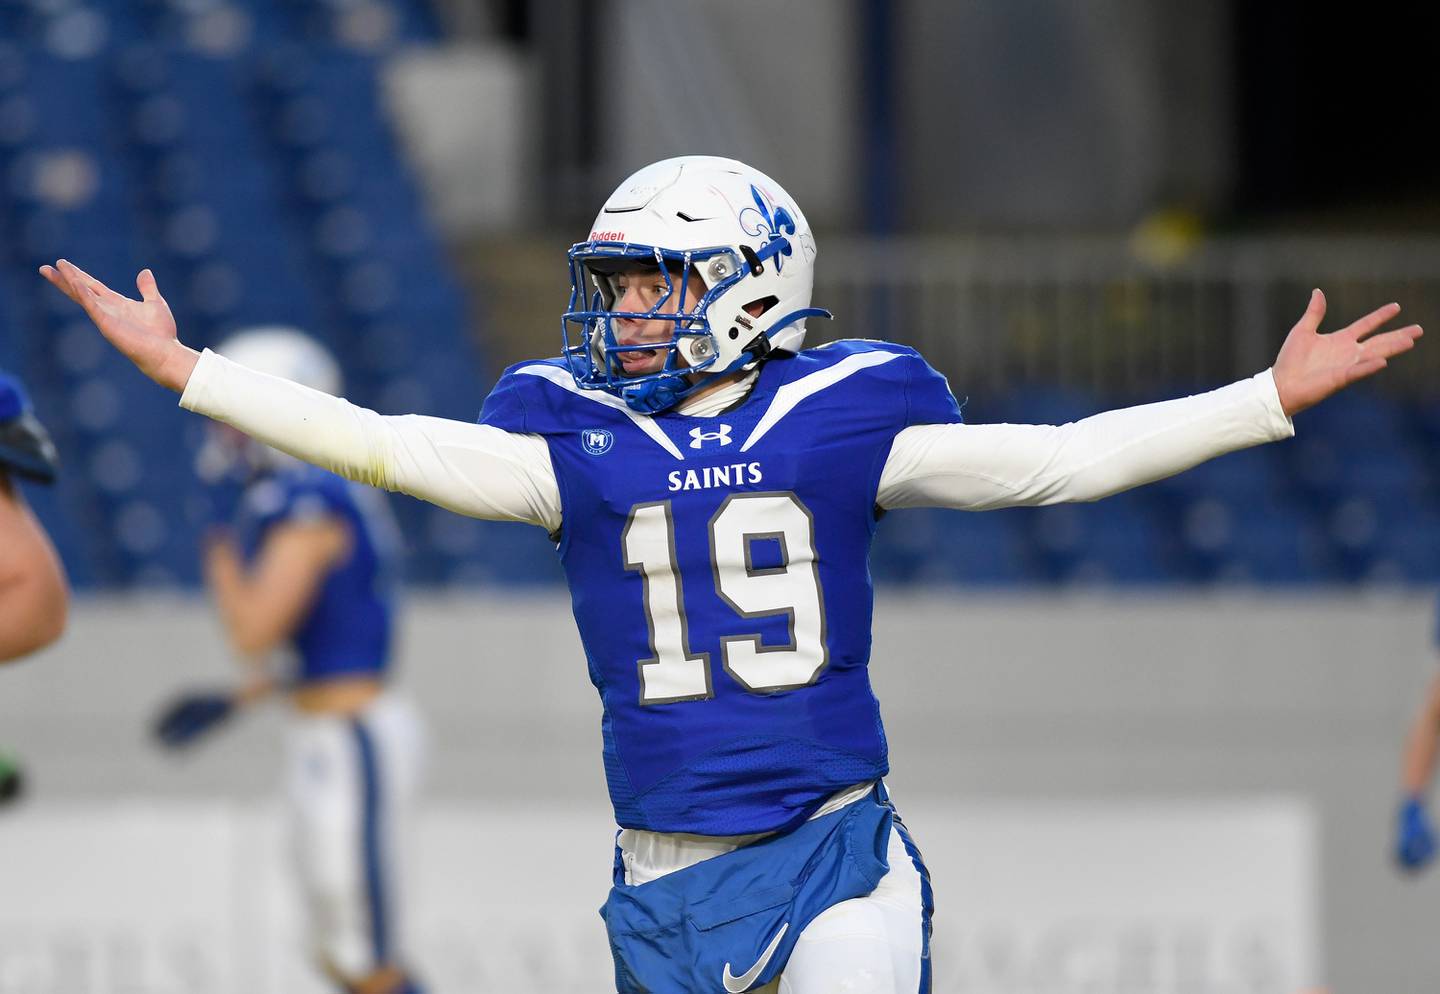 St. Mary's quarterback Carson Petitbon celebrates after scoring against Concordia Prep in the MIAA B Conference football championship, Friday, Nov. 18, 2022 at Navy-Marine Corps Memorial Stadium in Annapolis. St. MaryÕs won 21-13.